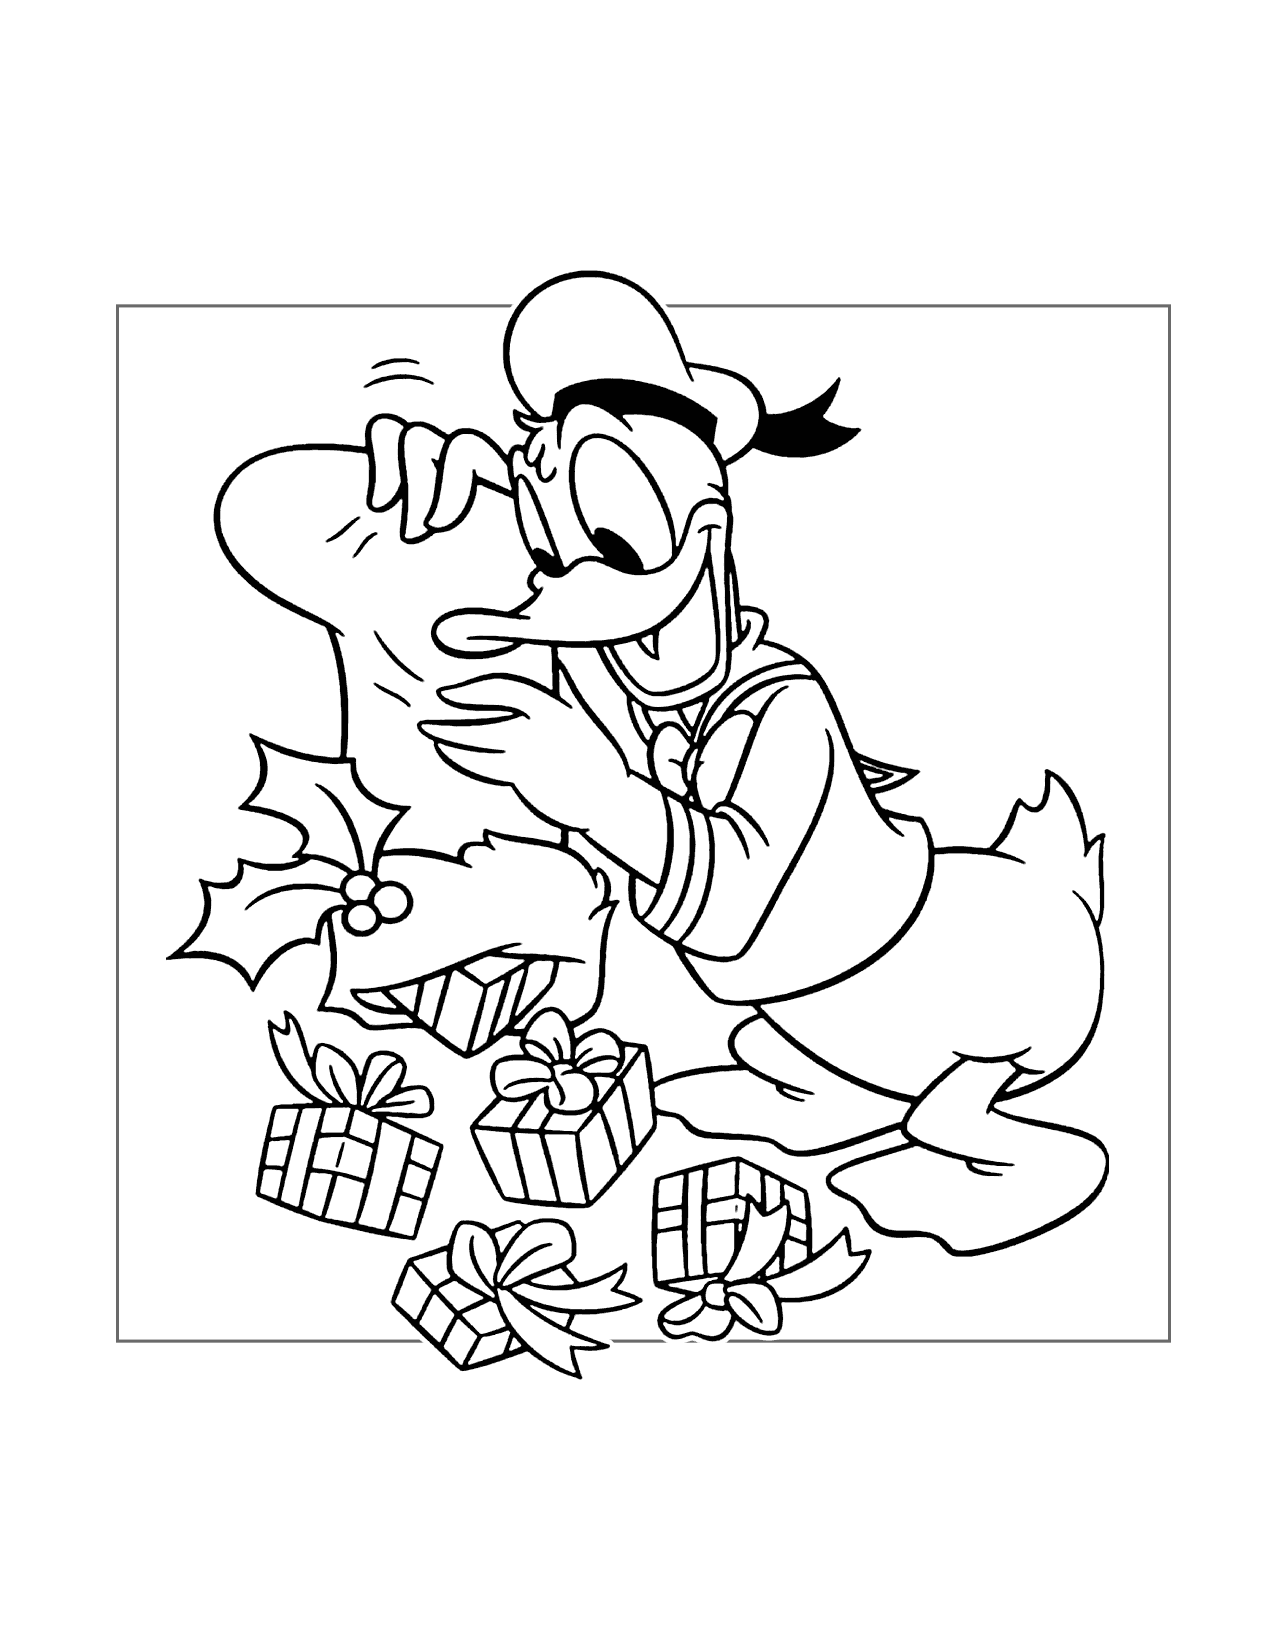 Donalds Bag Of Gifts Coloring Page